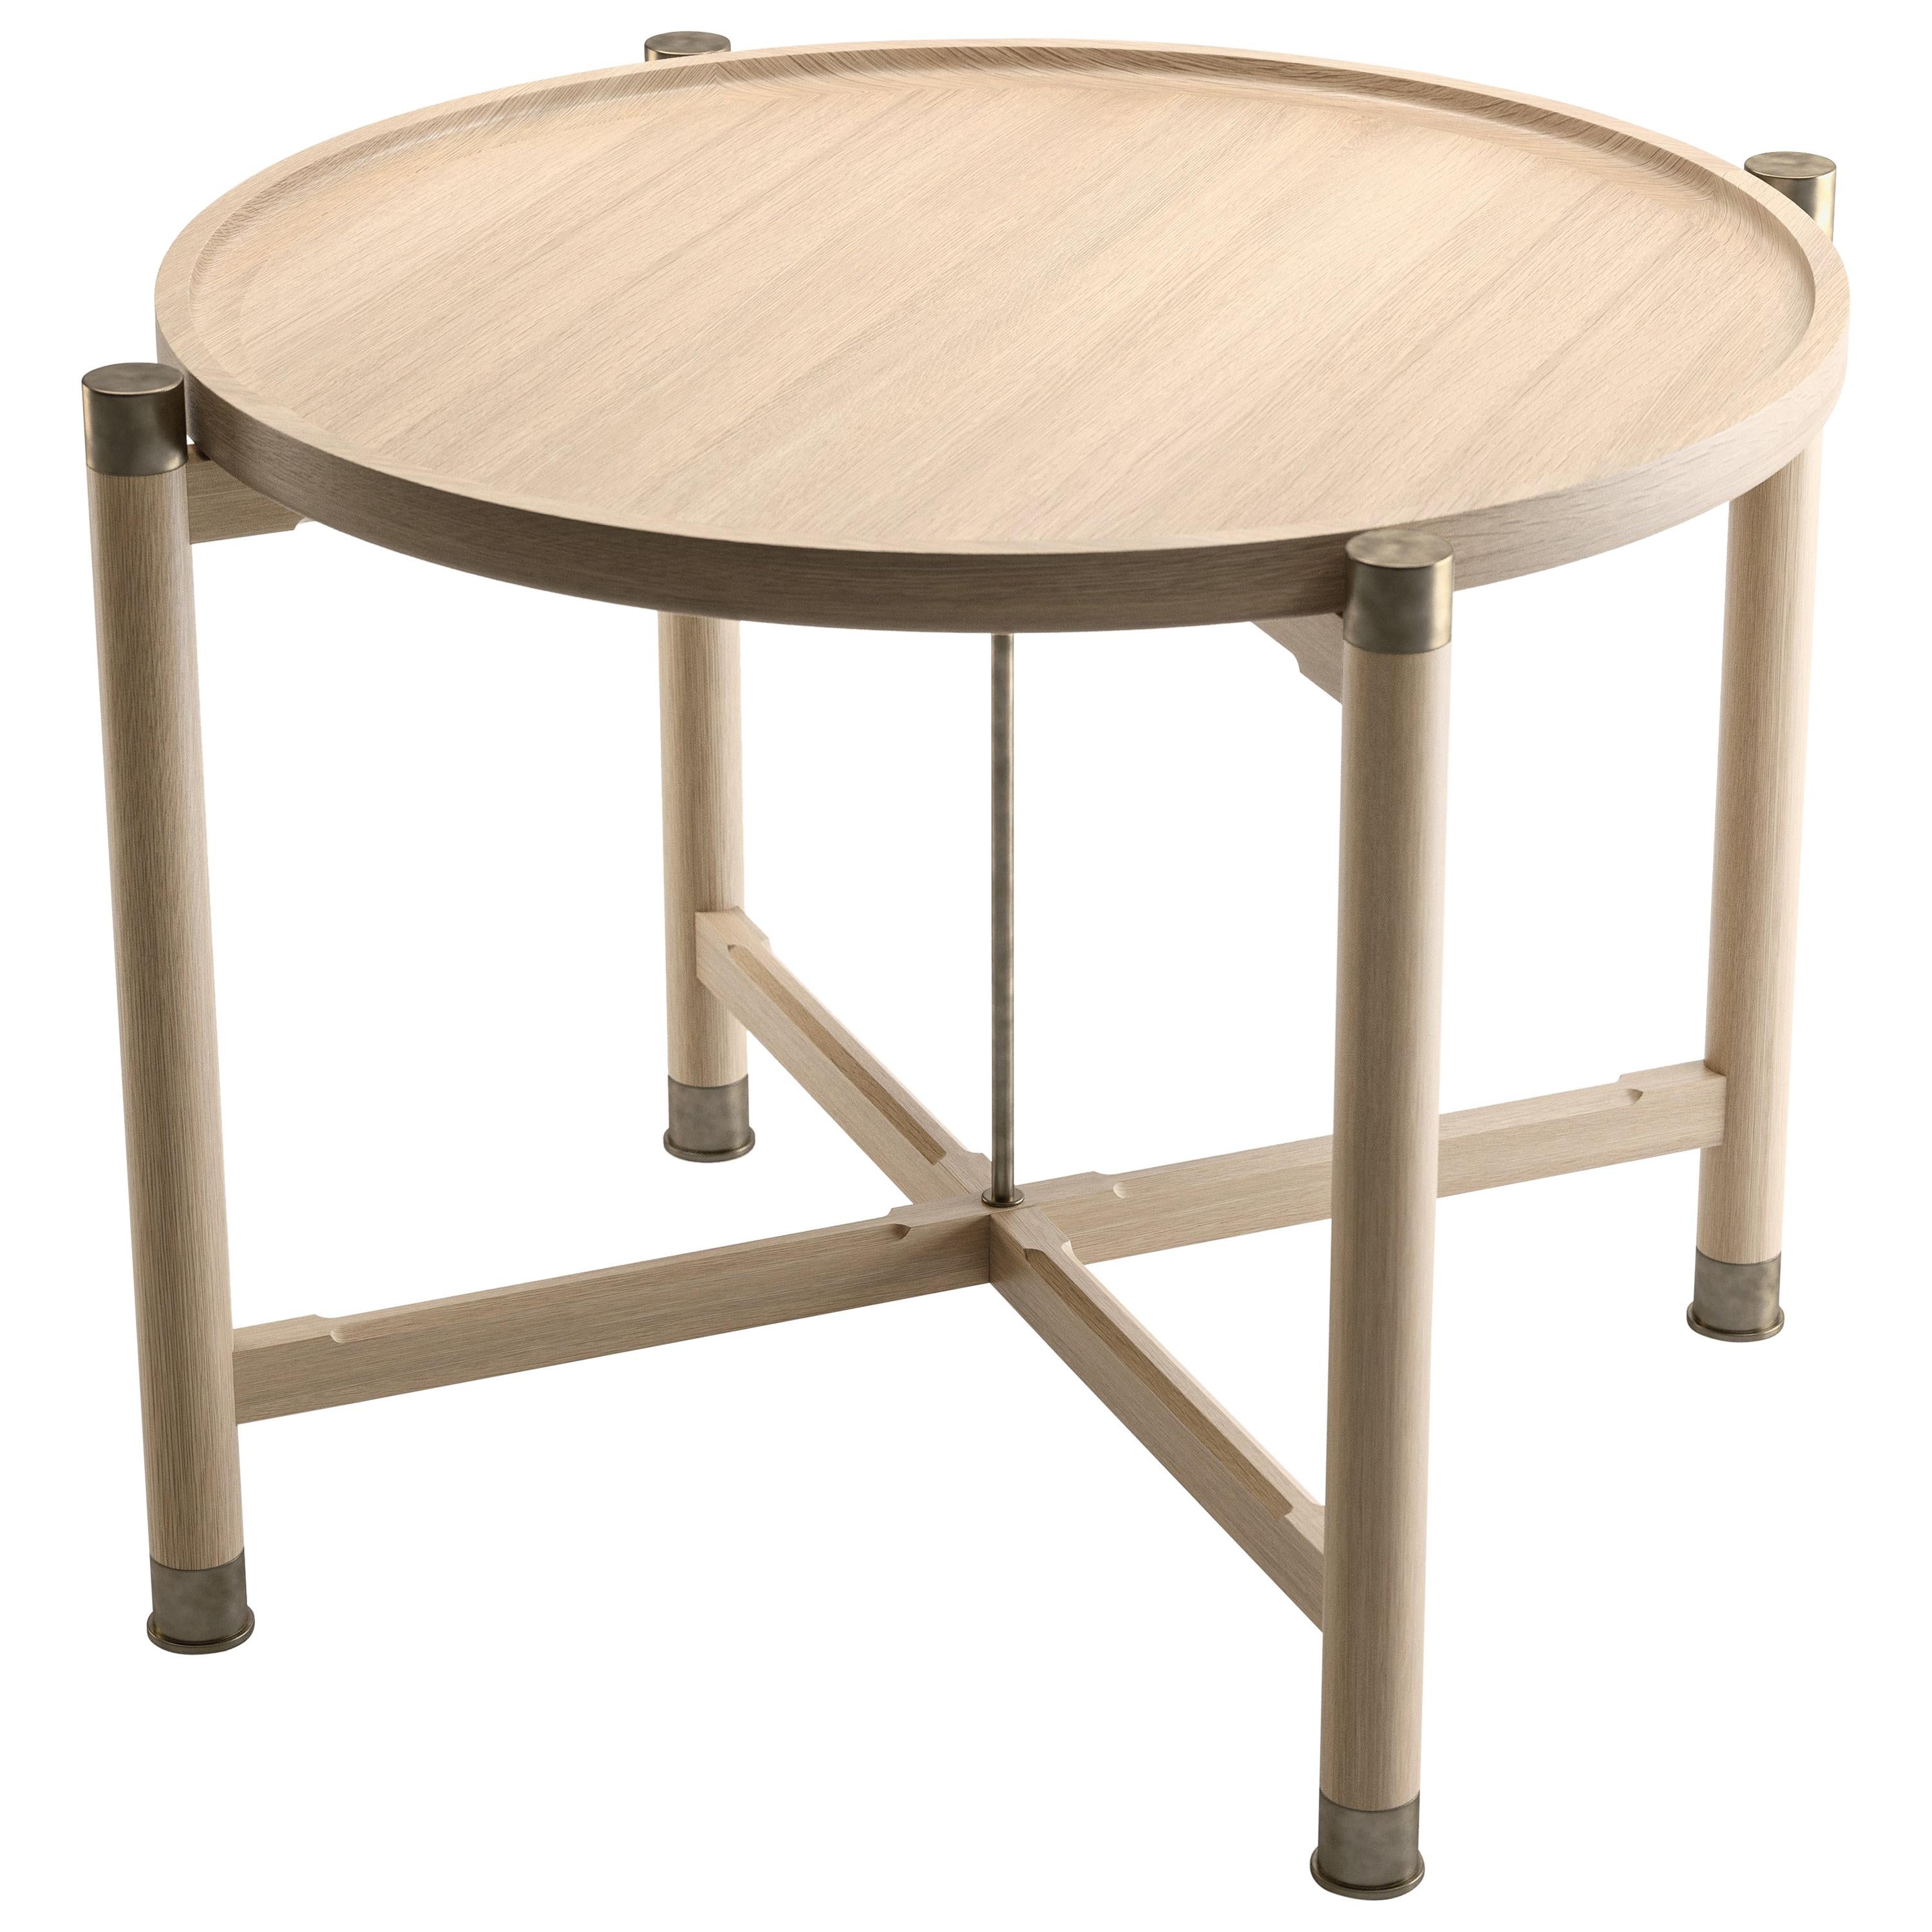 Otto Round Side Table in Bleached Oak with Antique Brass Fittings and Stem For Sale